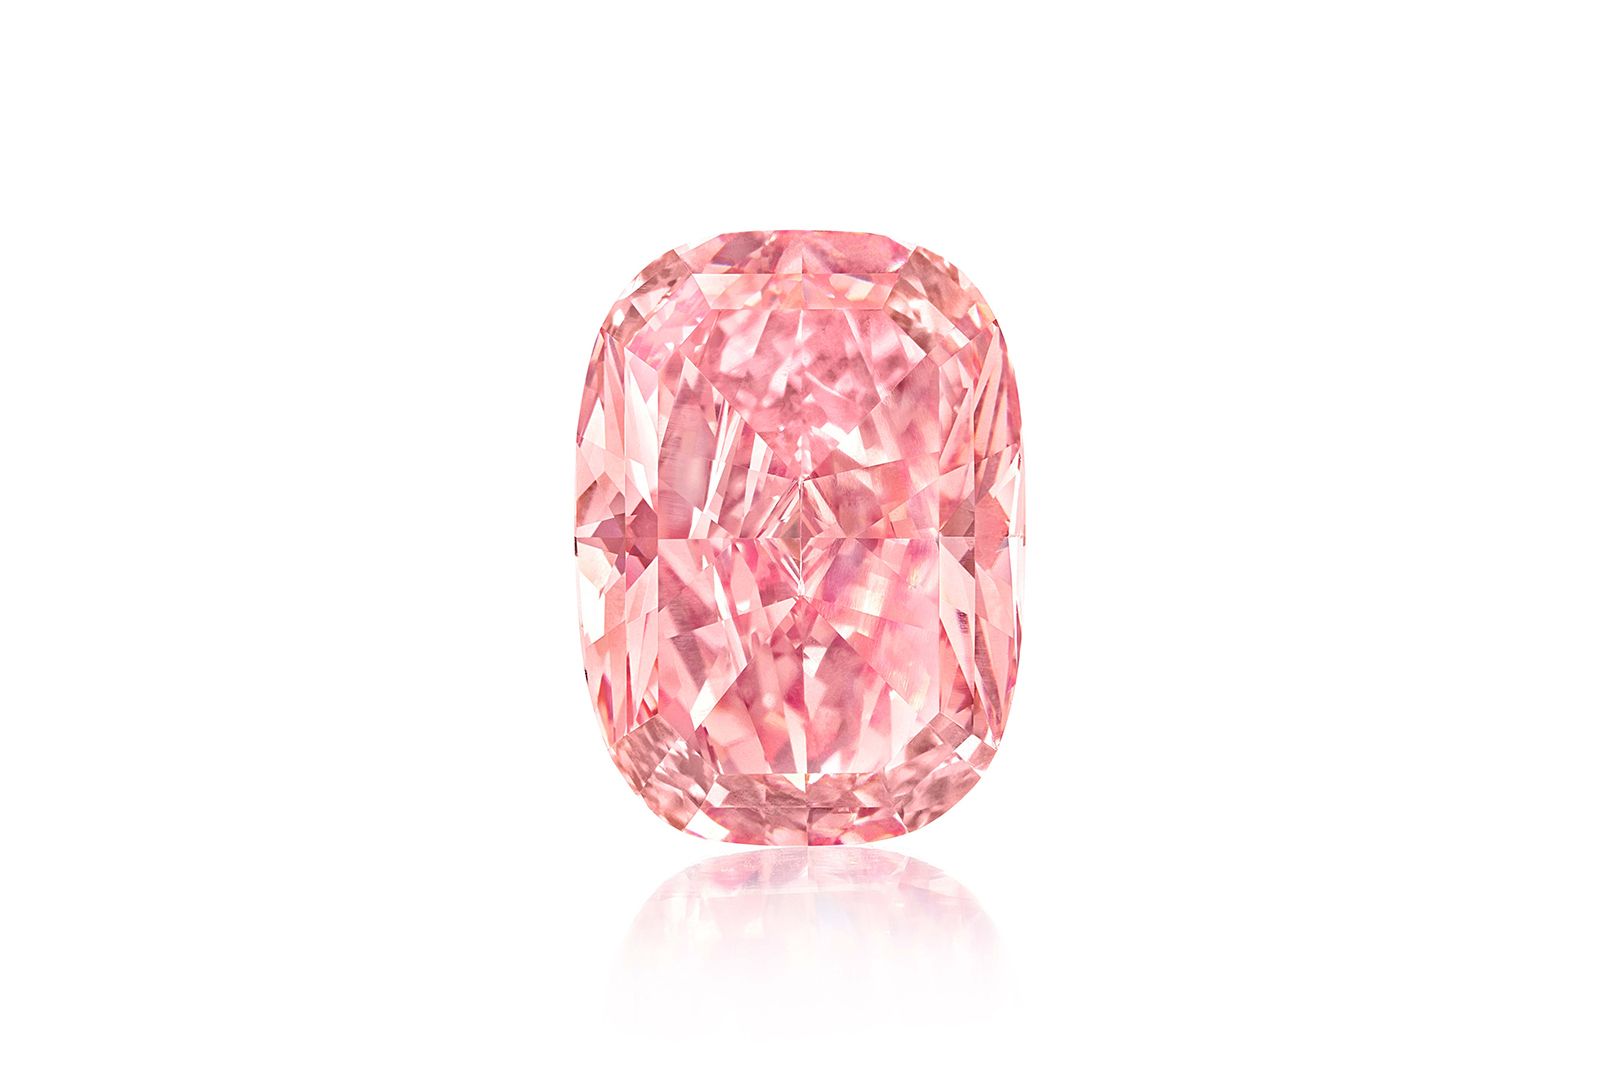 The Williamson Pink Star diamond was cut from a 32-carat rough pink diamond